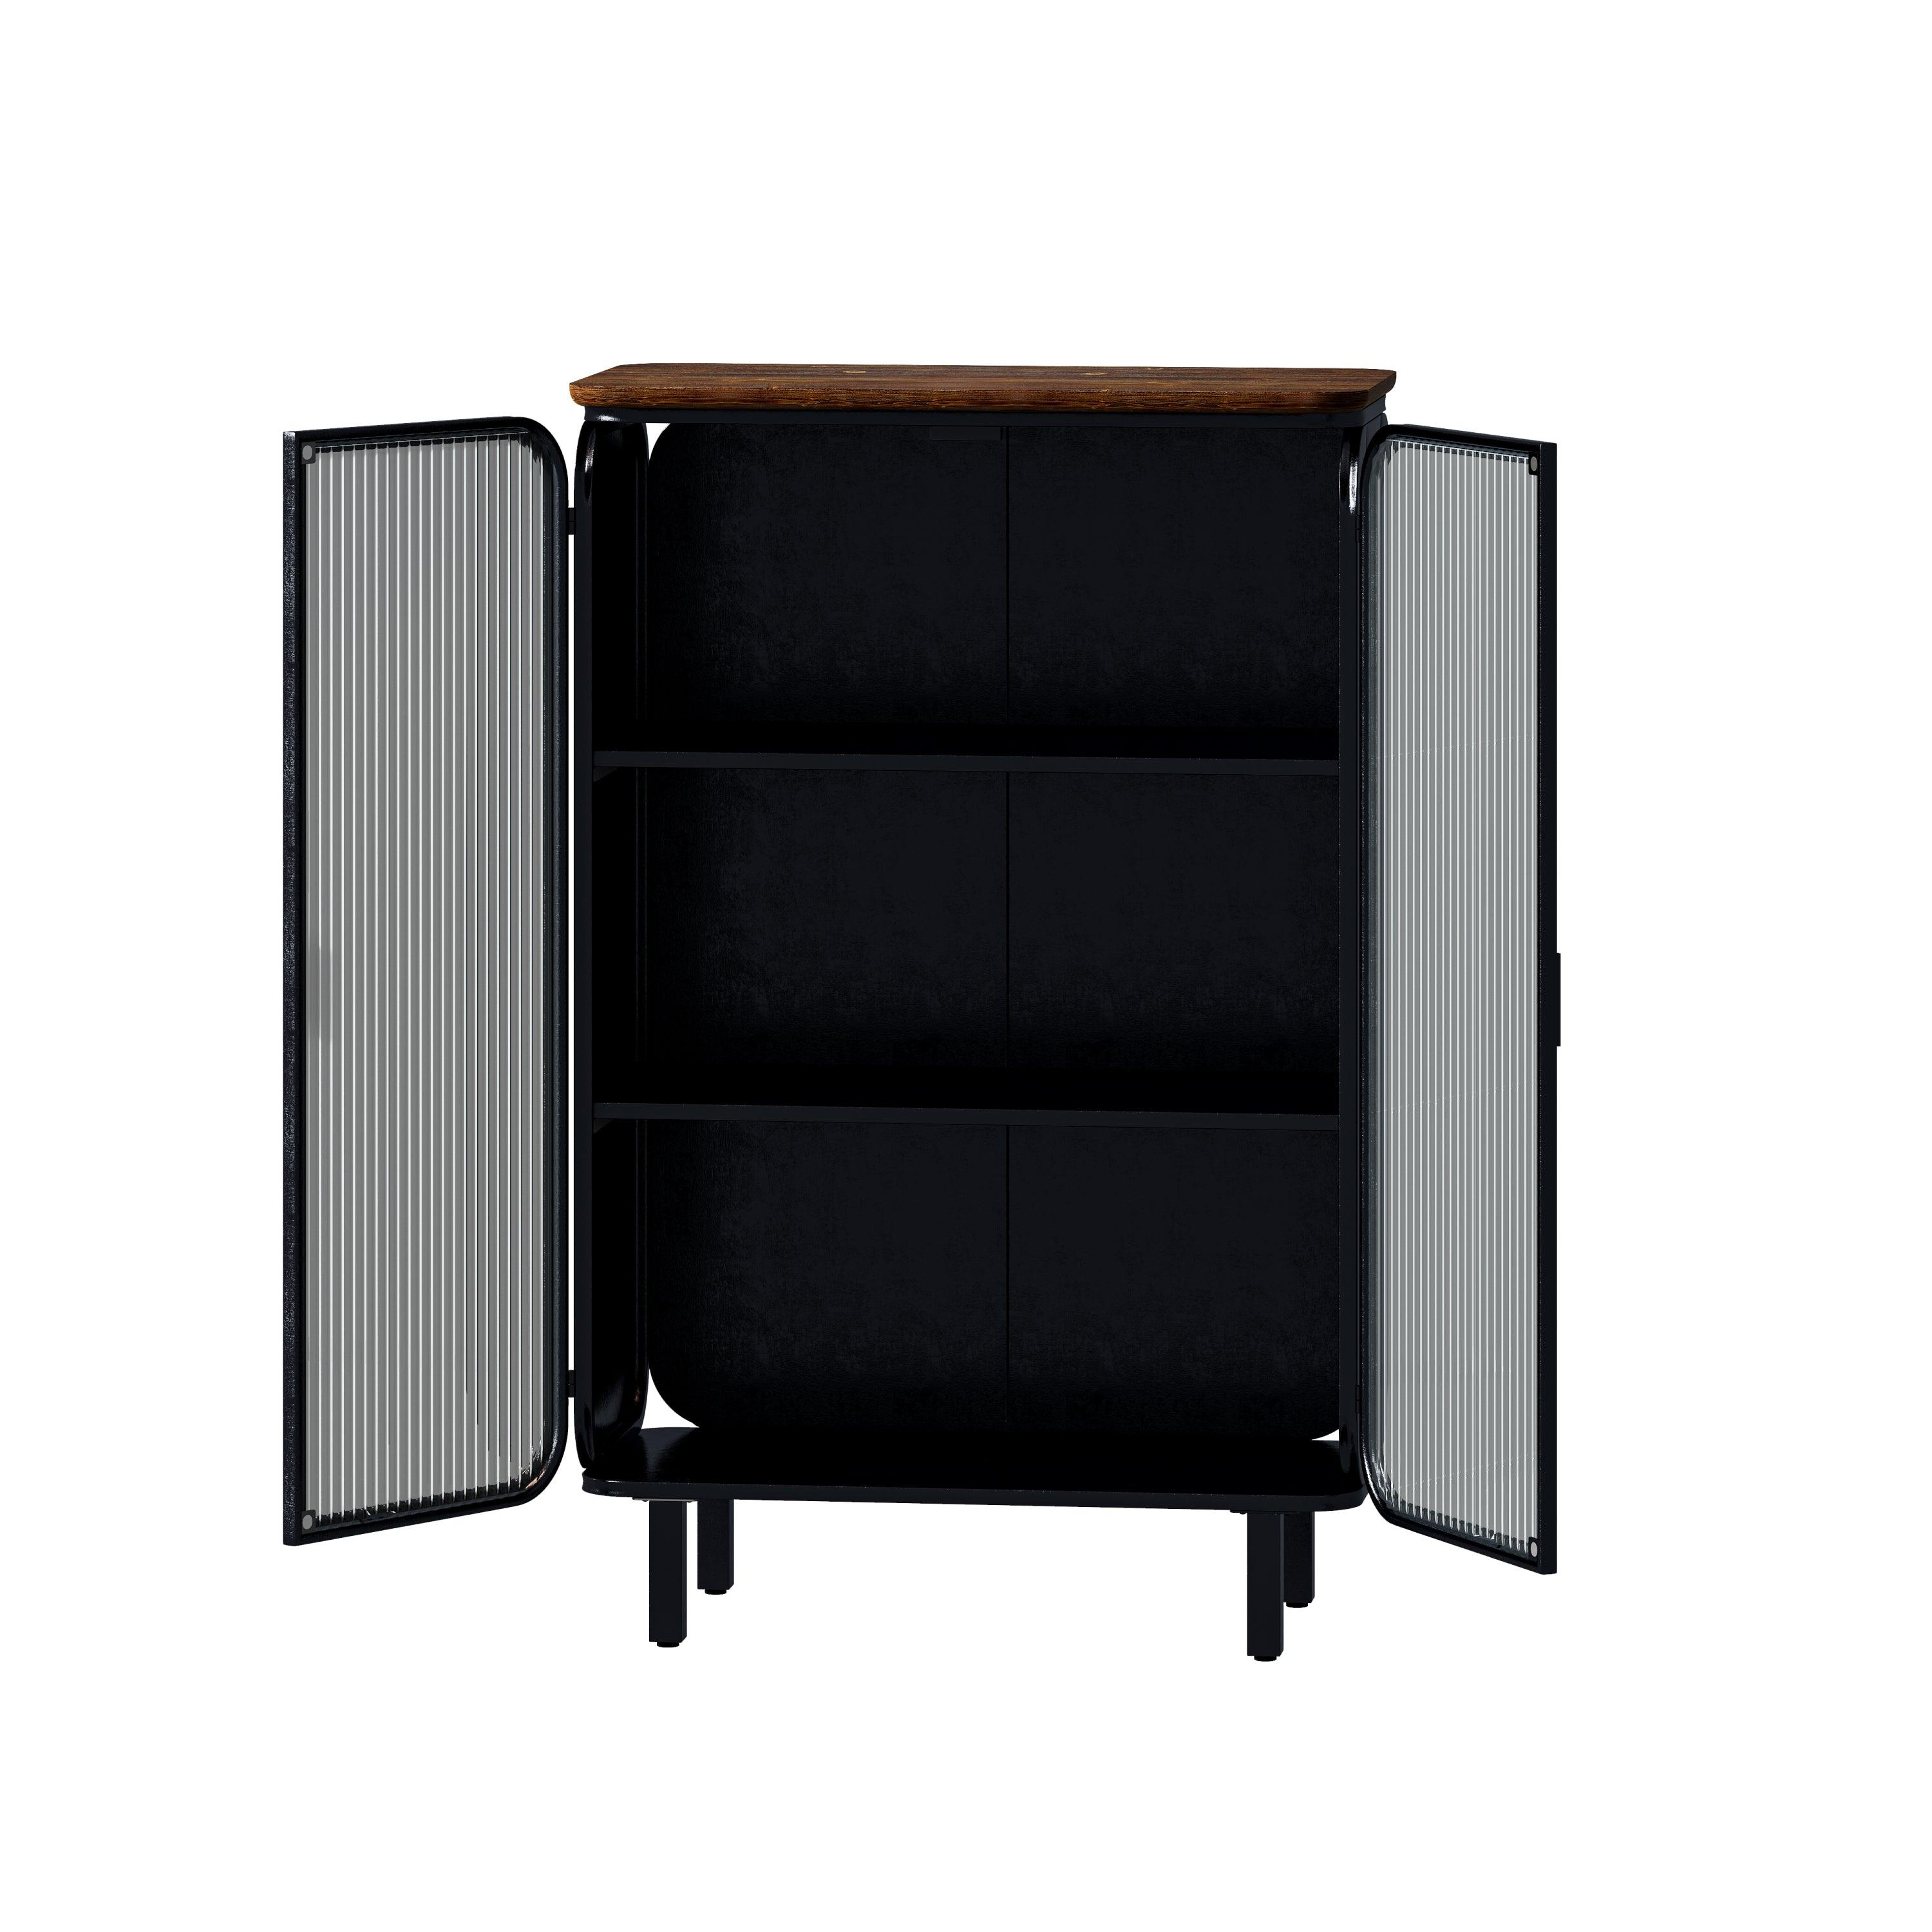 28.35" Glass Doors Modern Two-Door Cabinet With Featuring Three-Tier Storage, Unique Fir Cabinet Top, For Entryway, Living Room, Home Office, Dining Room